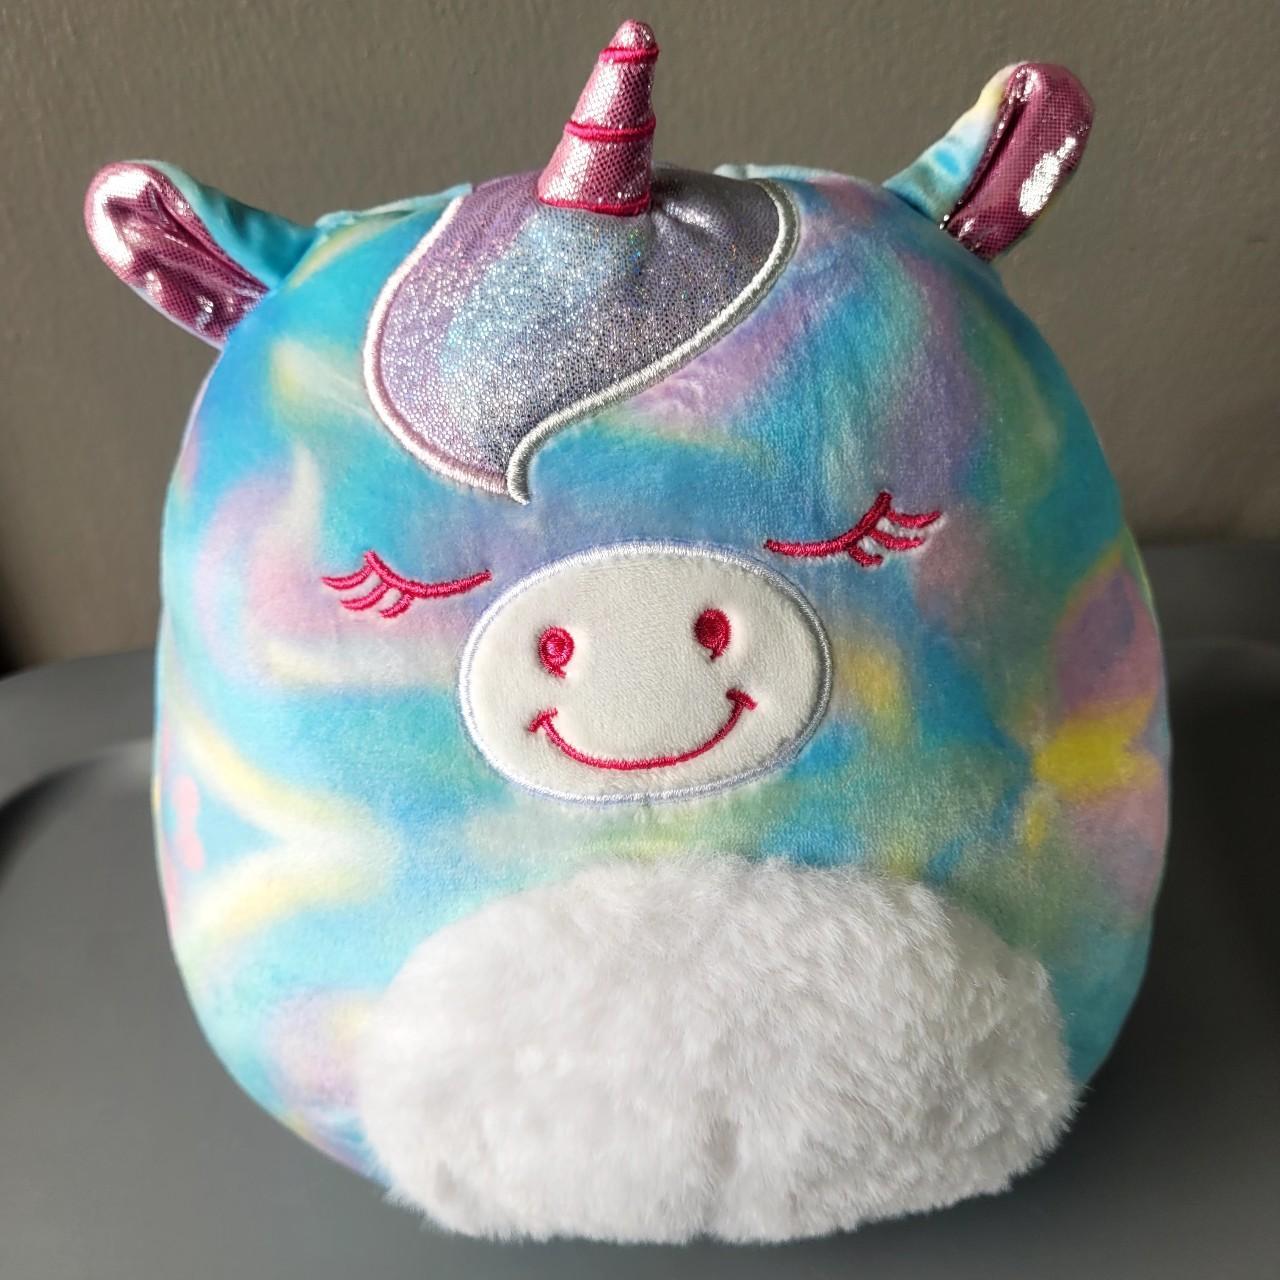 Fritz the Easter Flower Frog Squishmallow !!! They - Depop